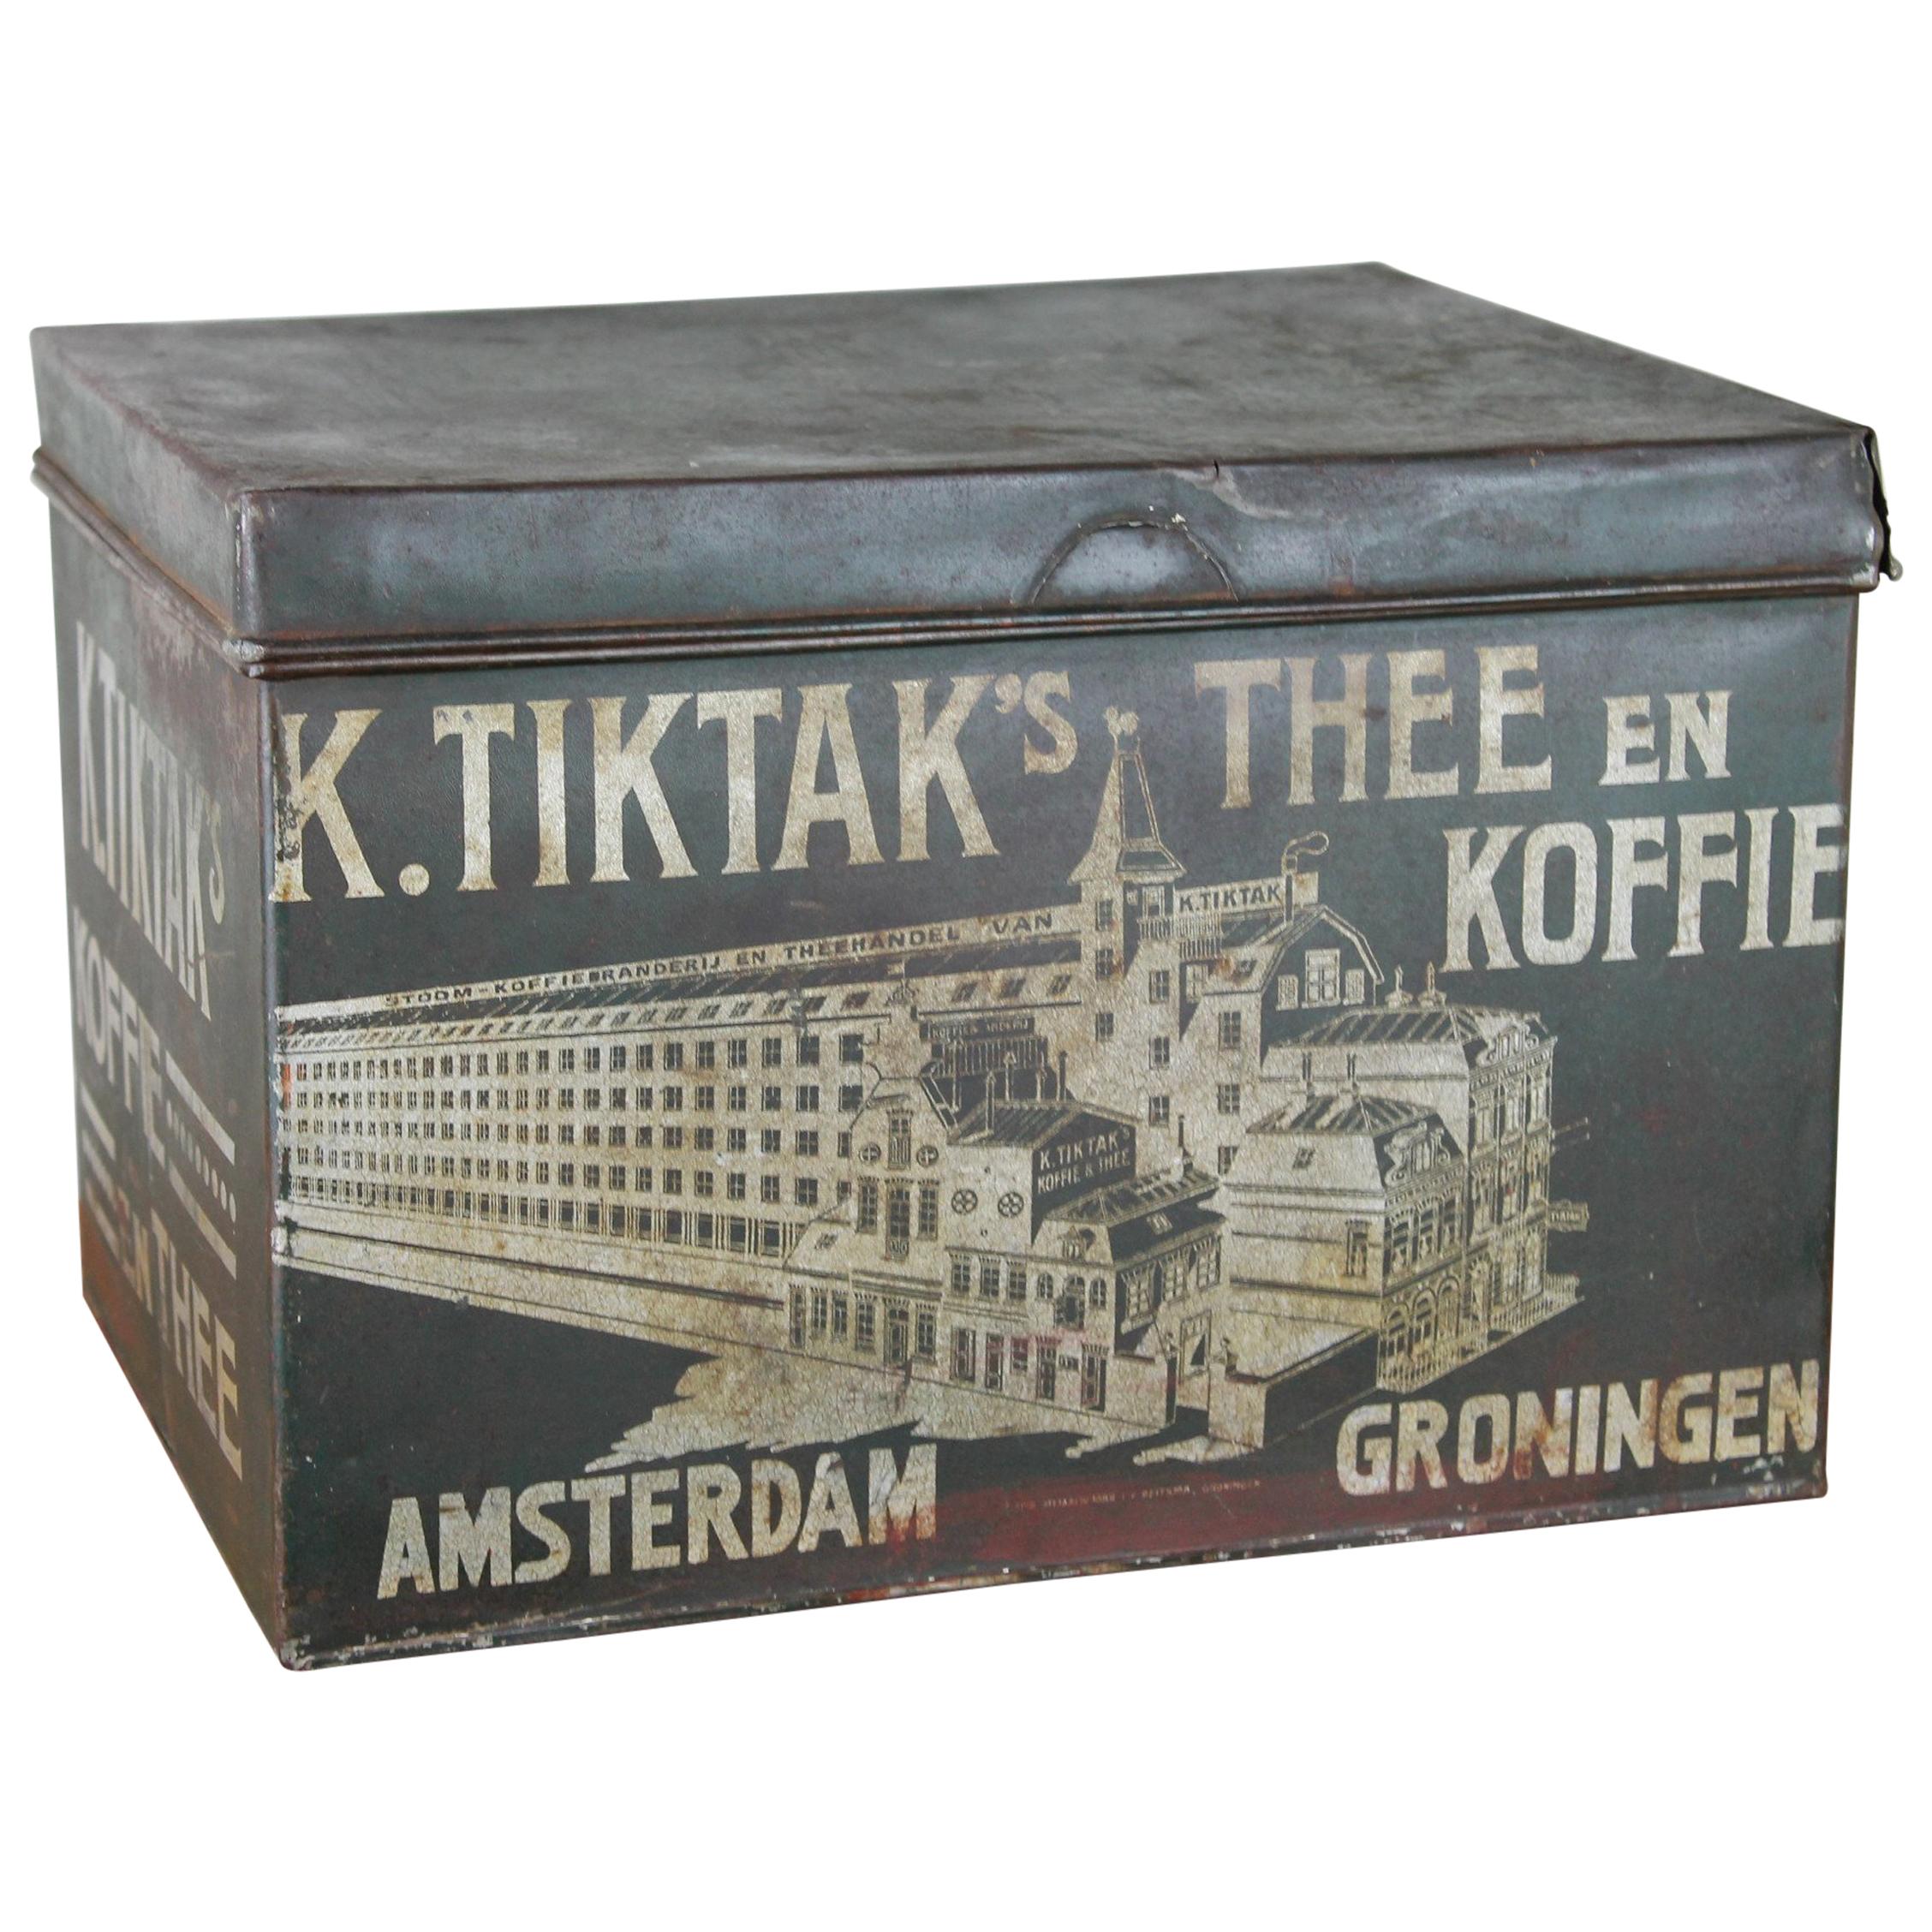 Antique Coffee and Tea Tin K. Tiktak's Amsterdam Groningen, Early 20th Century For Sale